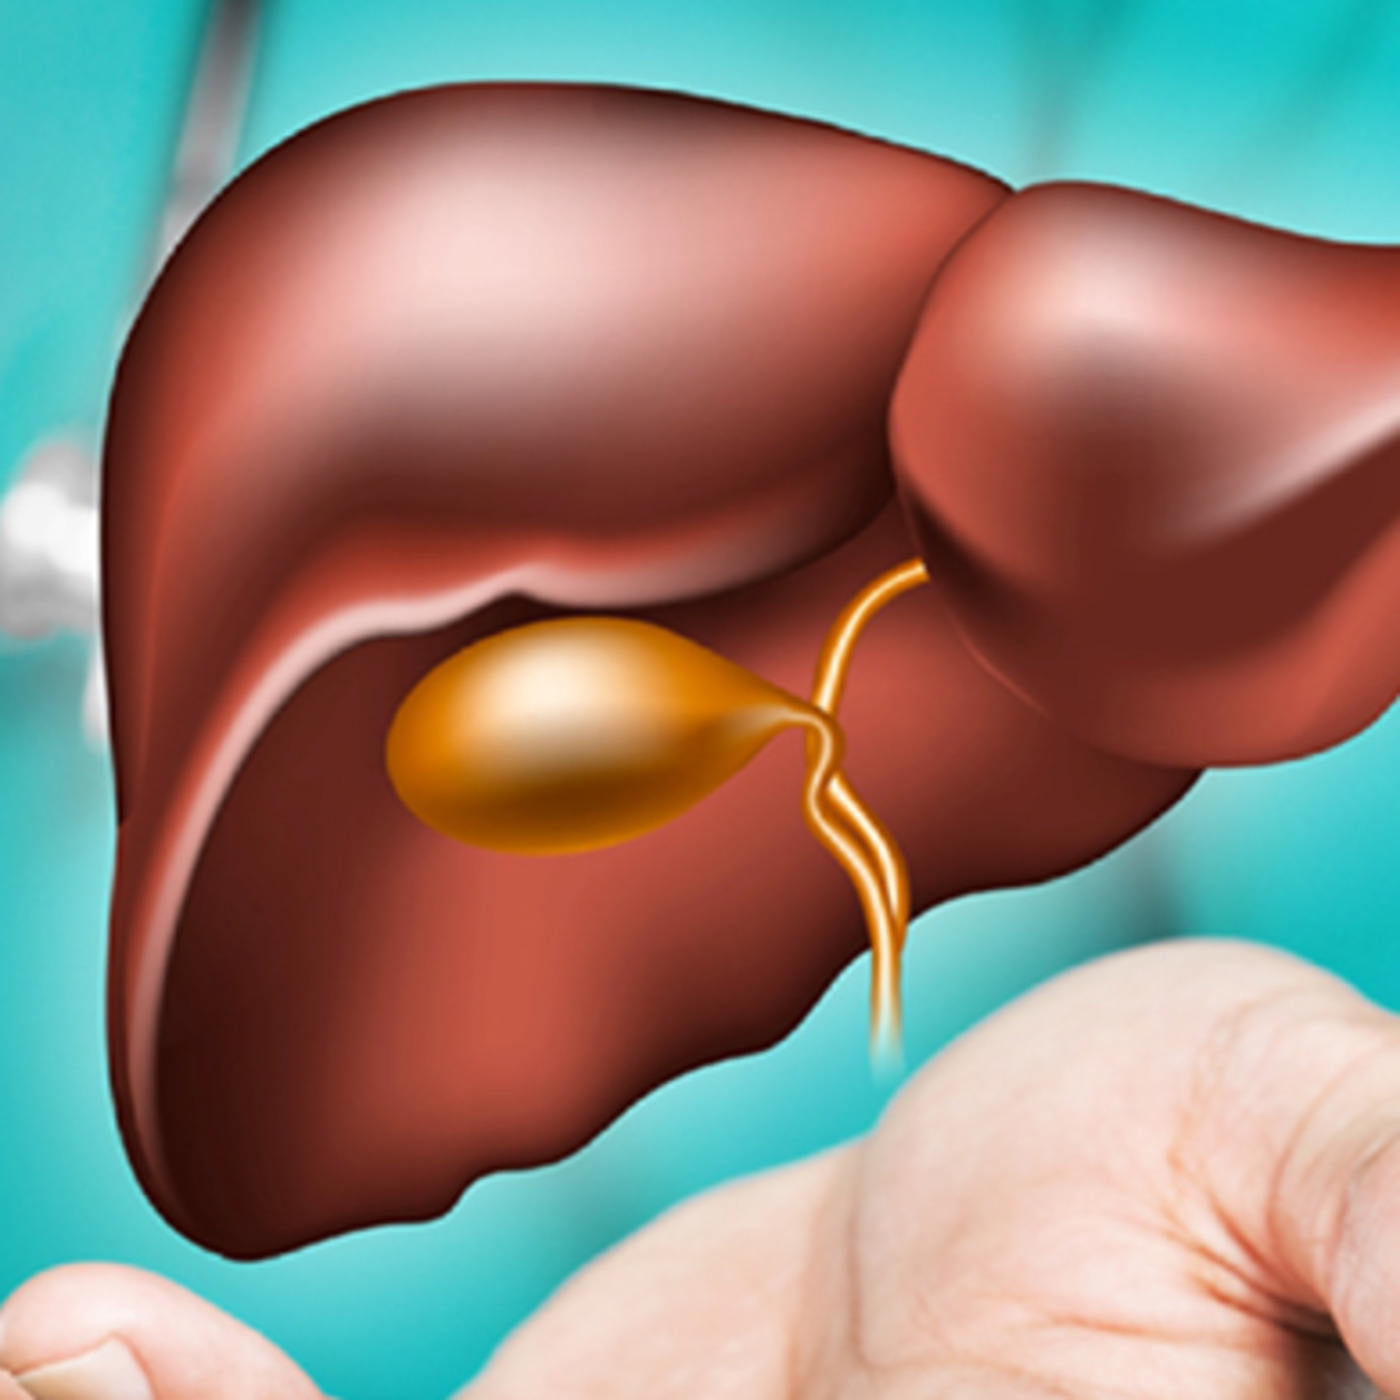 All About Your Liver- PART 2 The Amazing Functions Of Your Liver